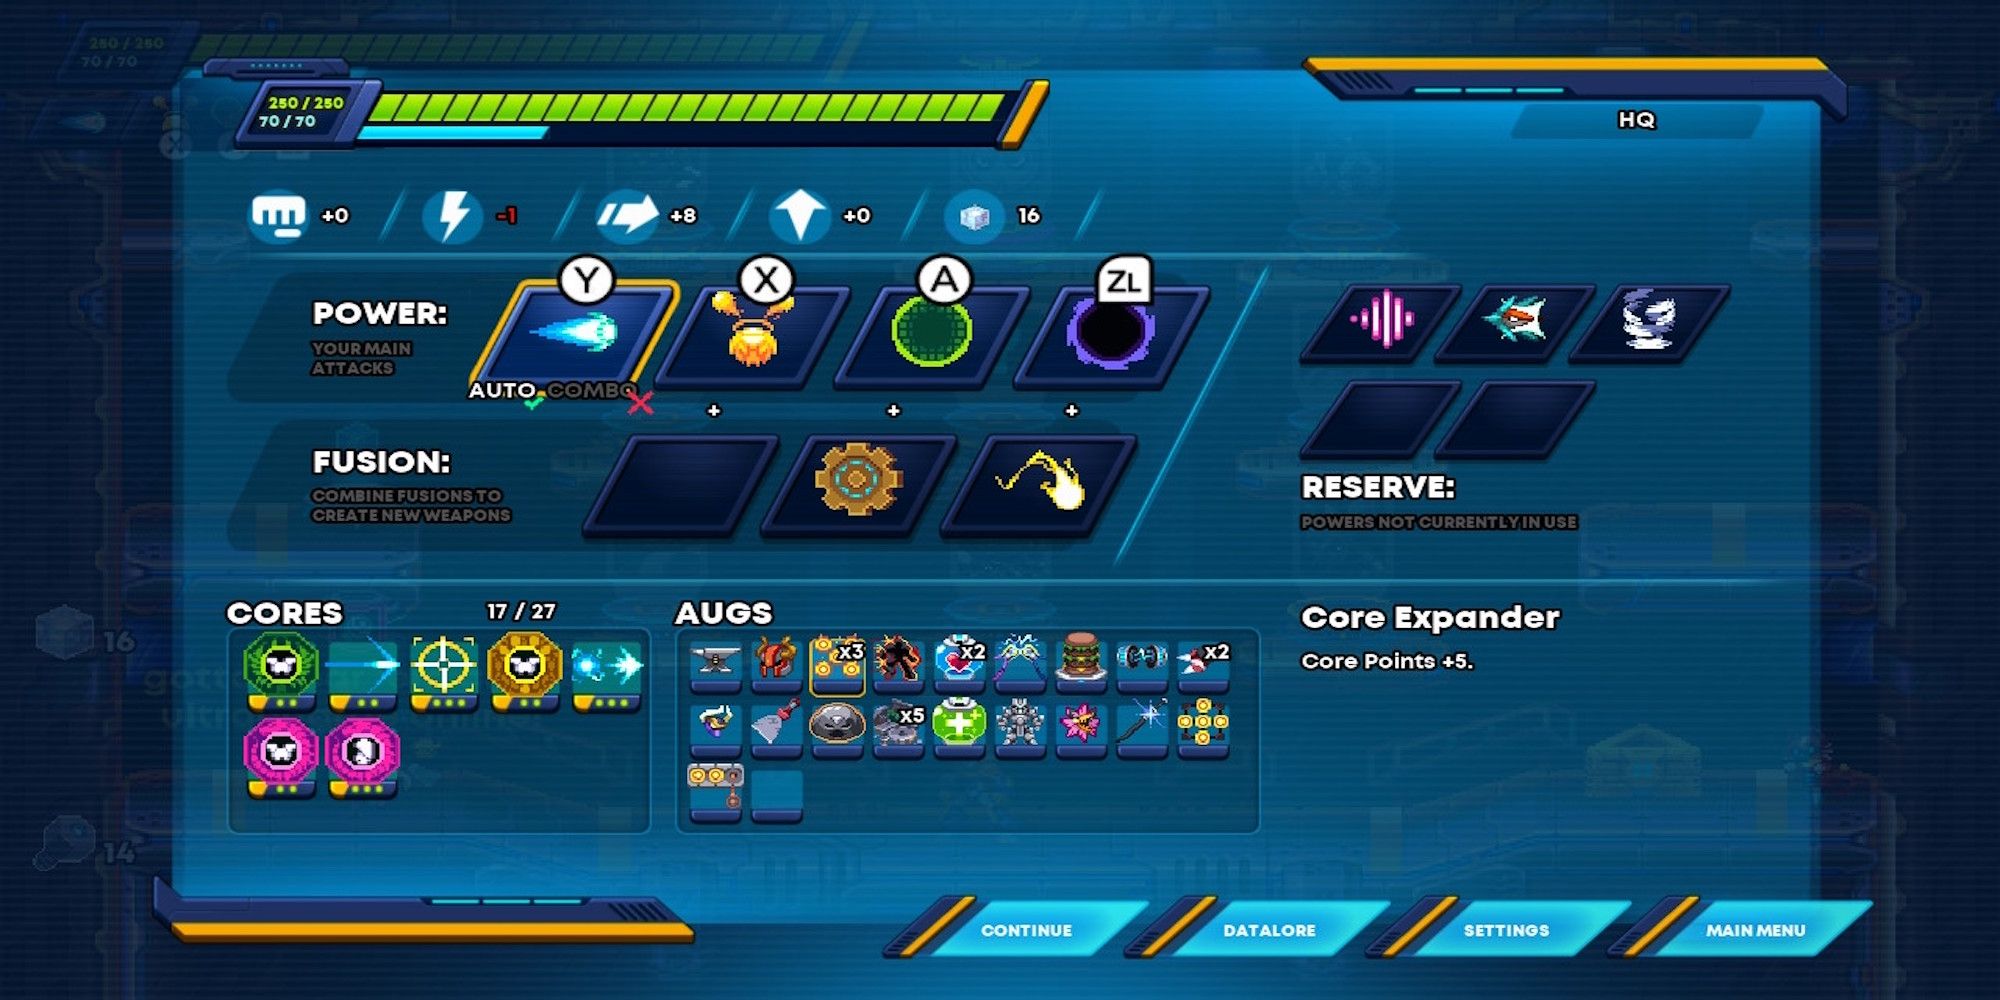 Core Expander Augment in 30XX